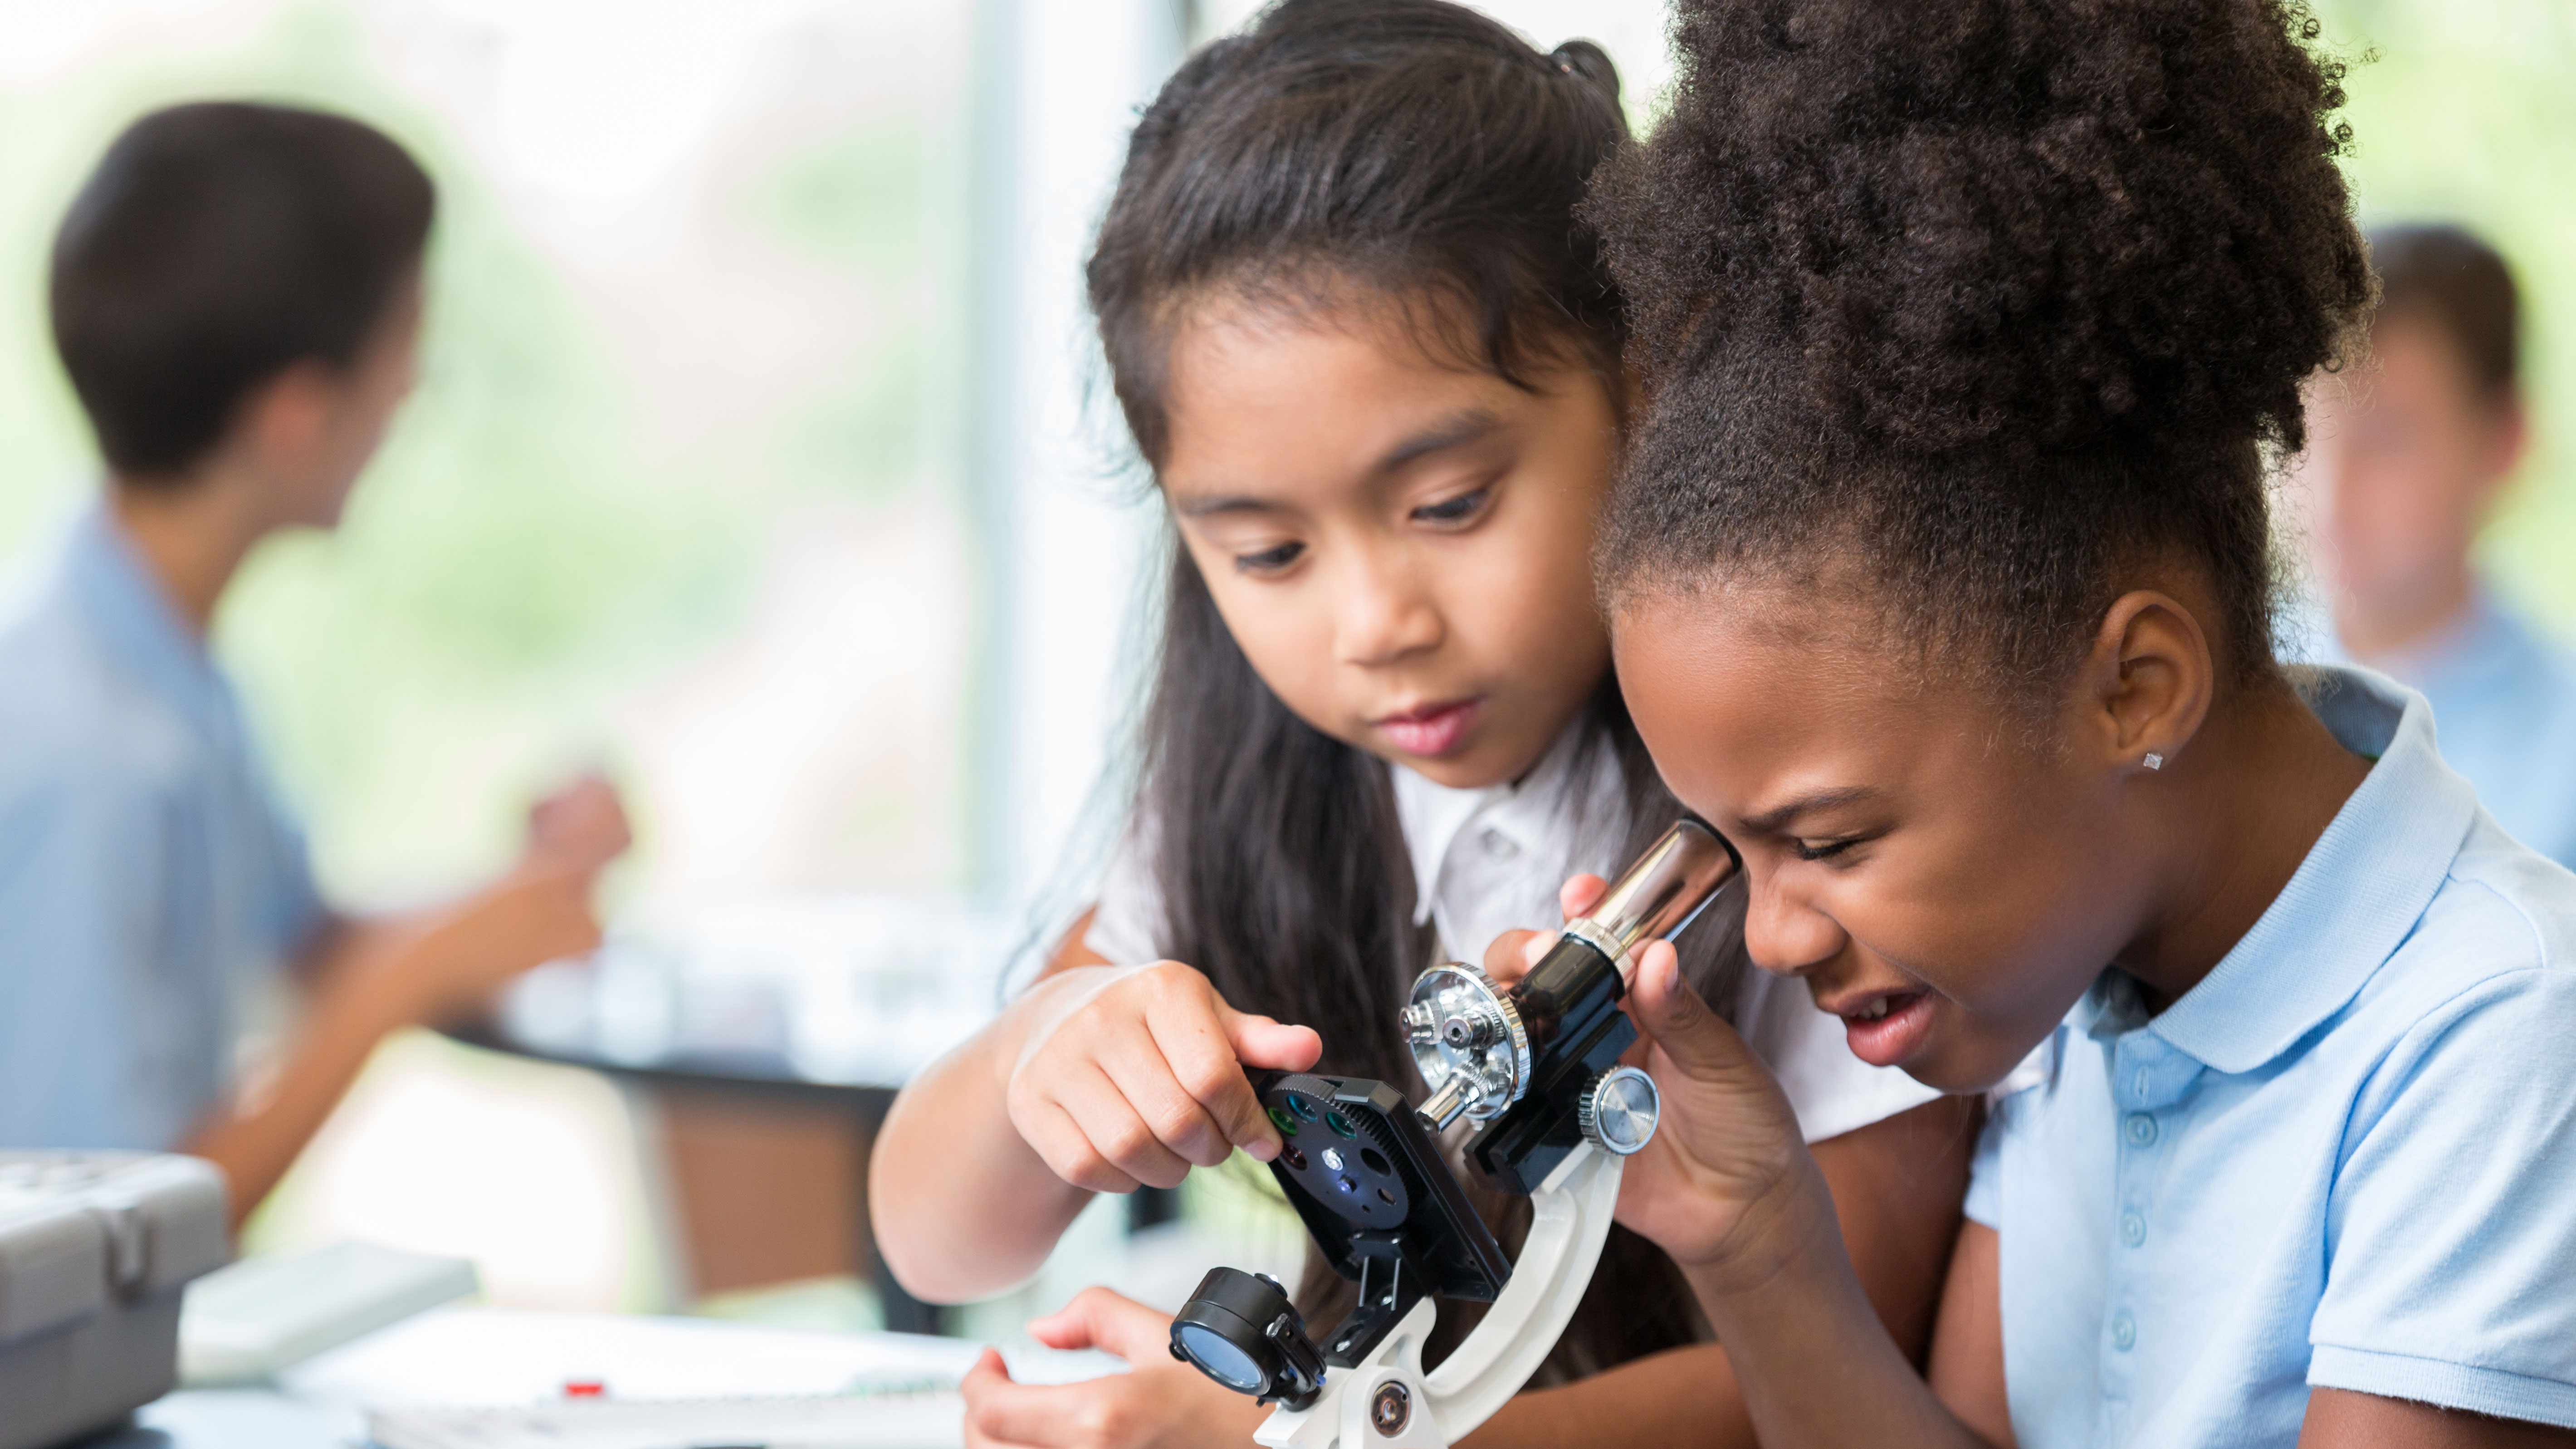 Young girls in science class looking into a microscope